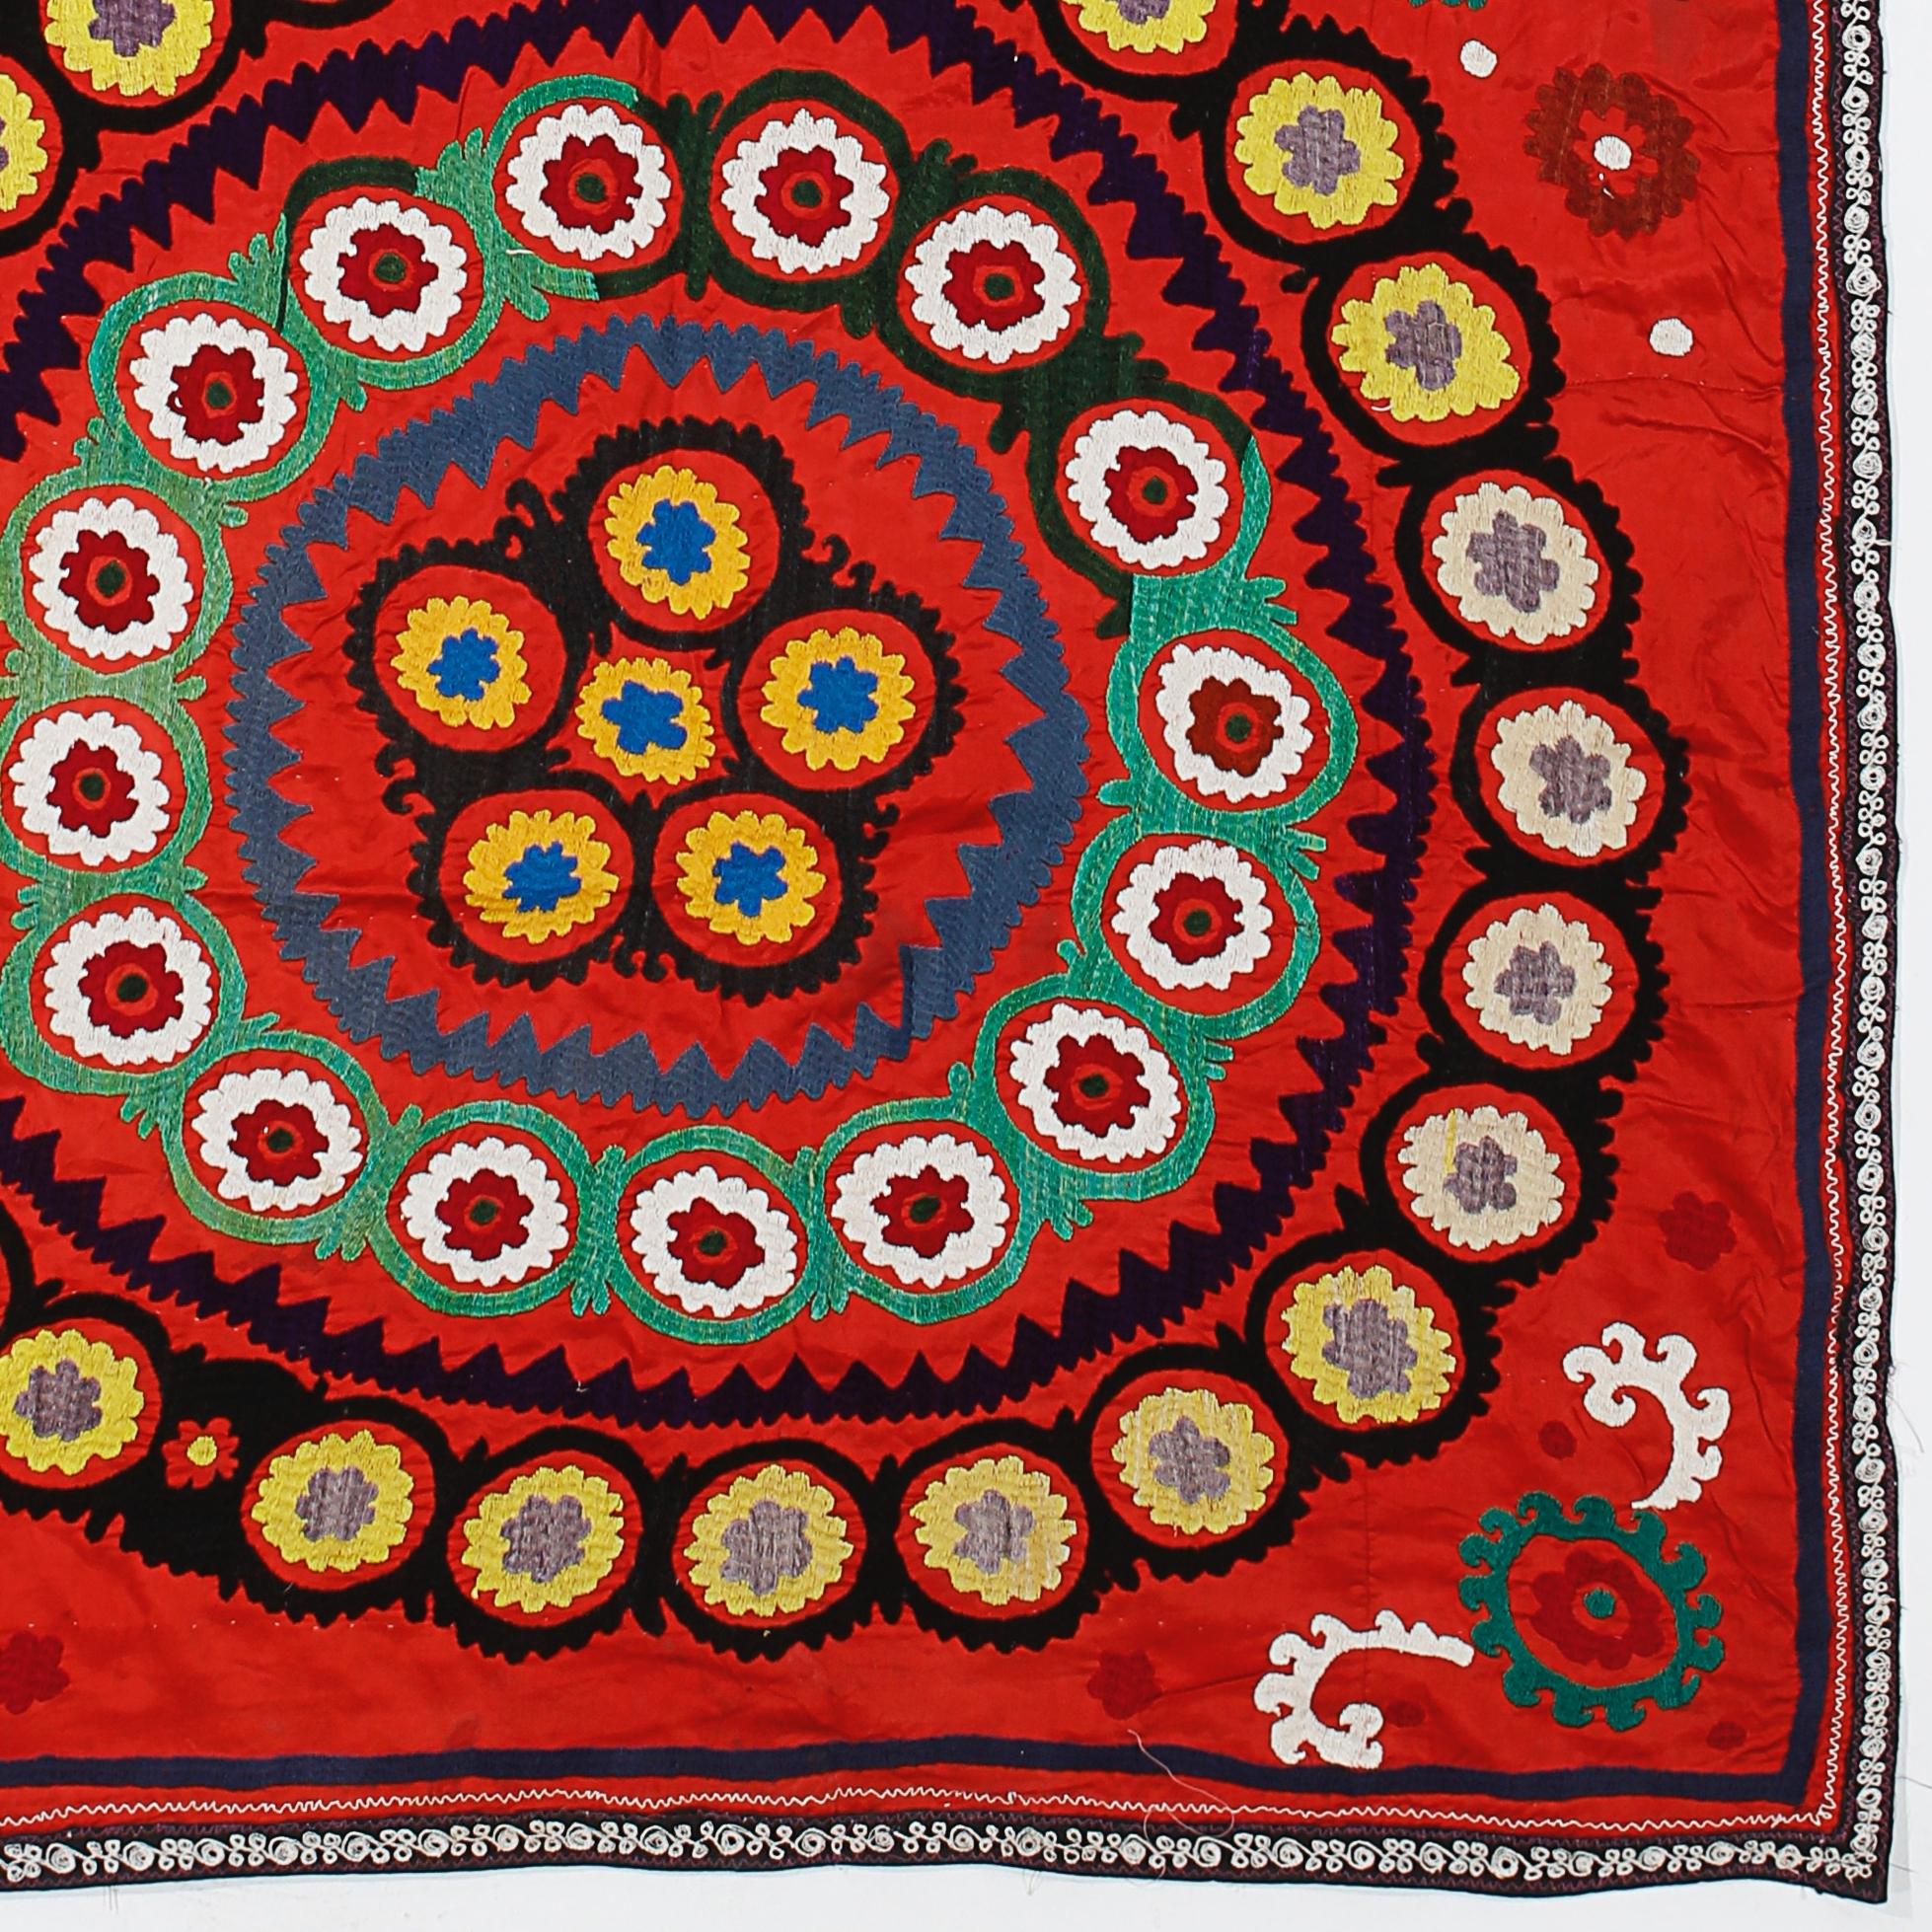 Ouzbek 3.8x7.3 Ft Red Wall Decor, Silk Embroidered Wall Hanging, Needlework Table Cover (Décoration murale en soie) en vente